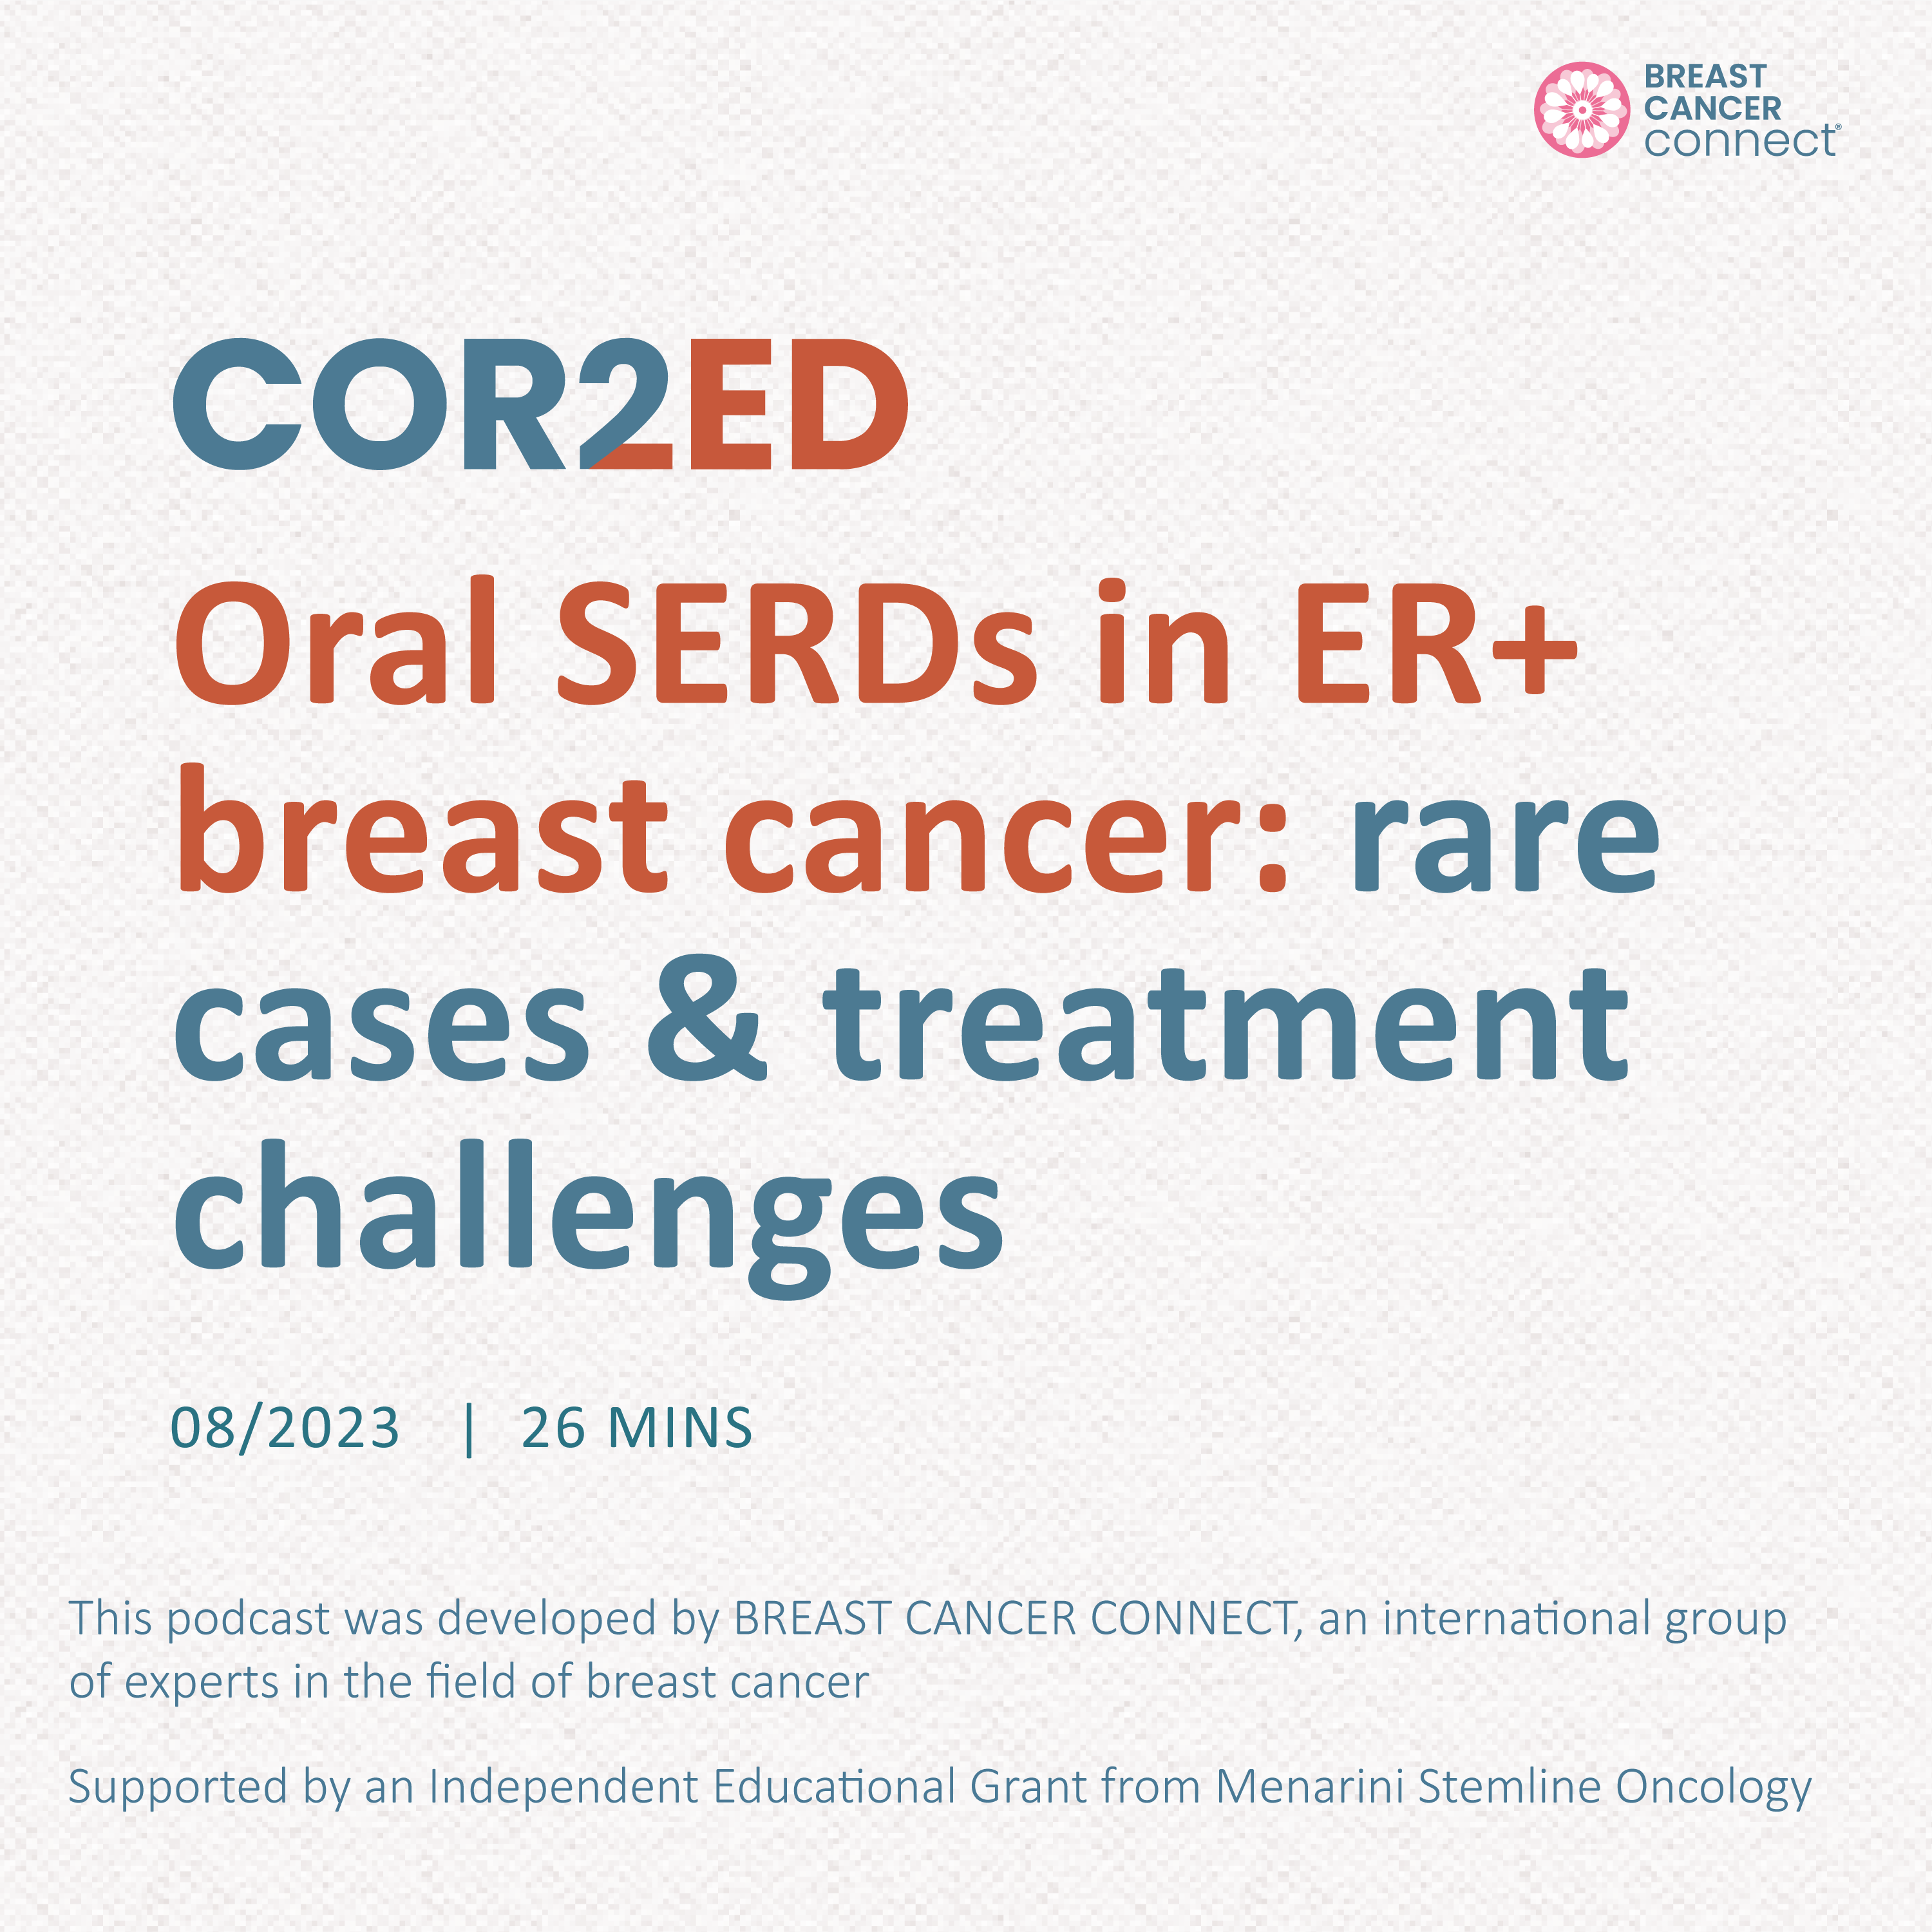 Breast Cancer: Oral SERDs in ER+ breast cancer. Episode 3 - rare cases & treatment challenges